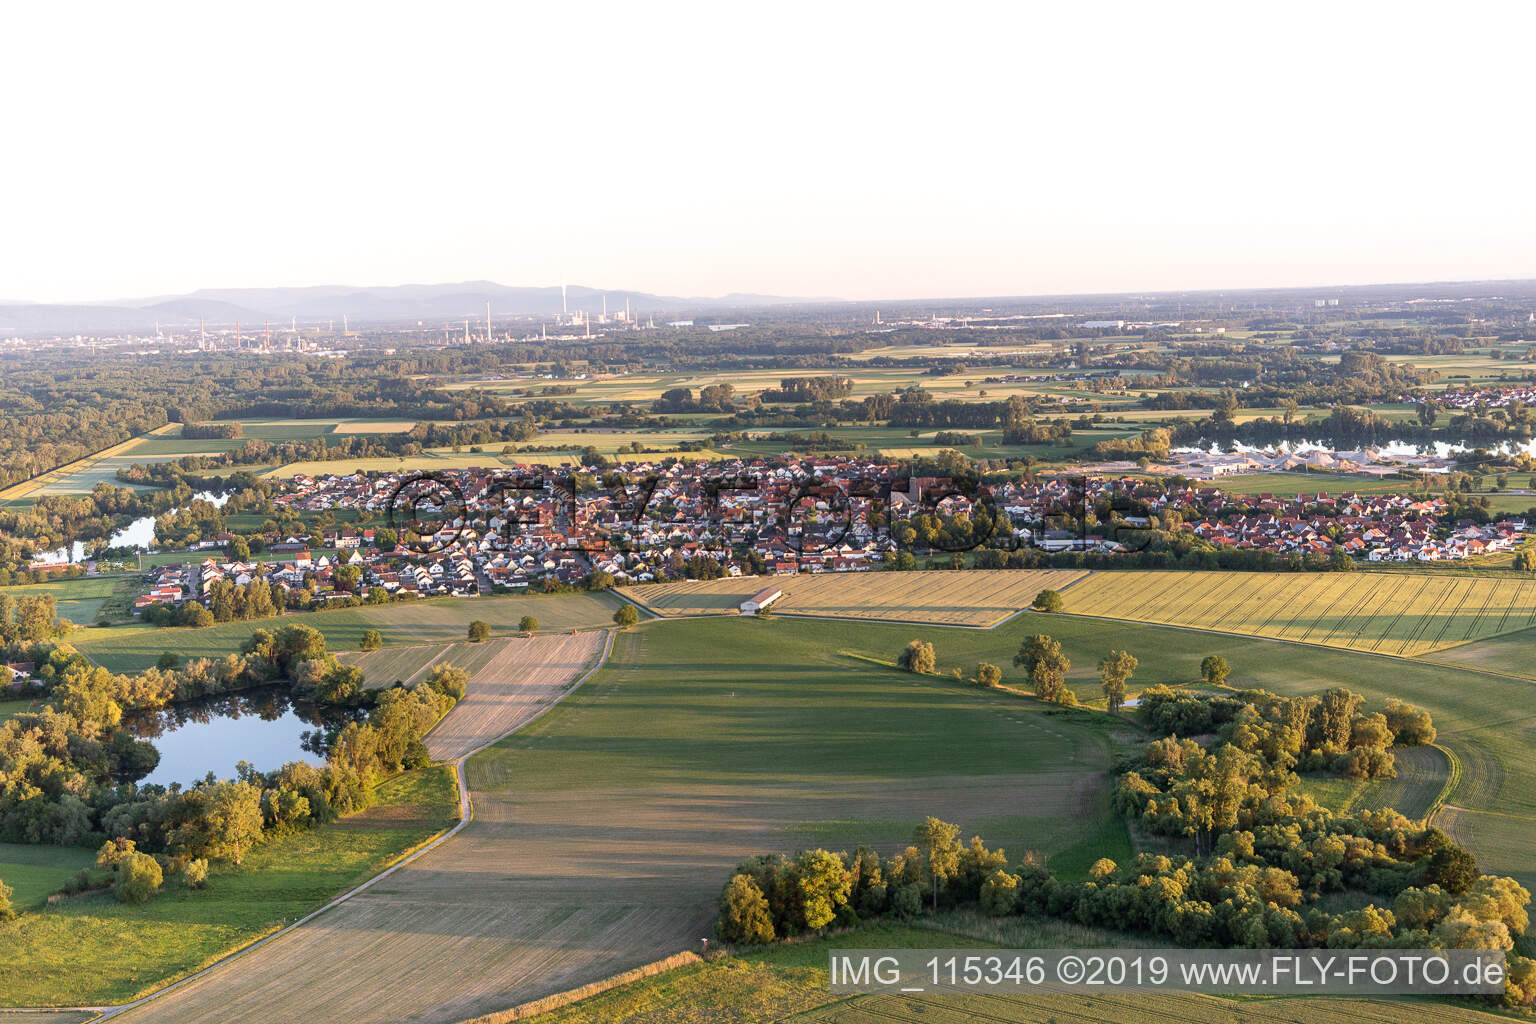 Leimersheim in the state Rhineland-Palatinate, Germany from the drone perspective